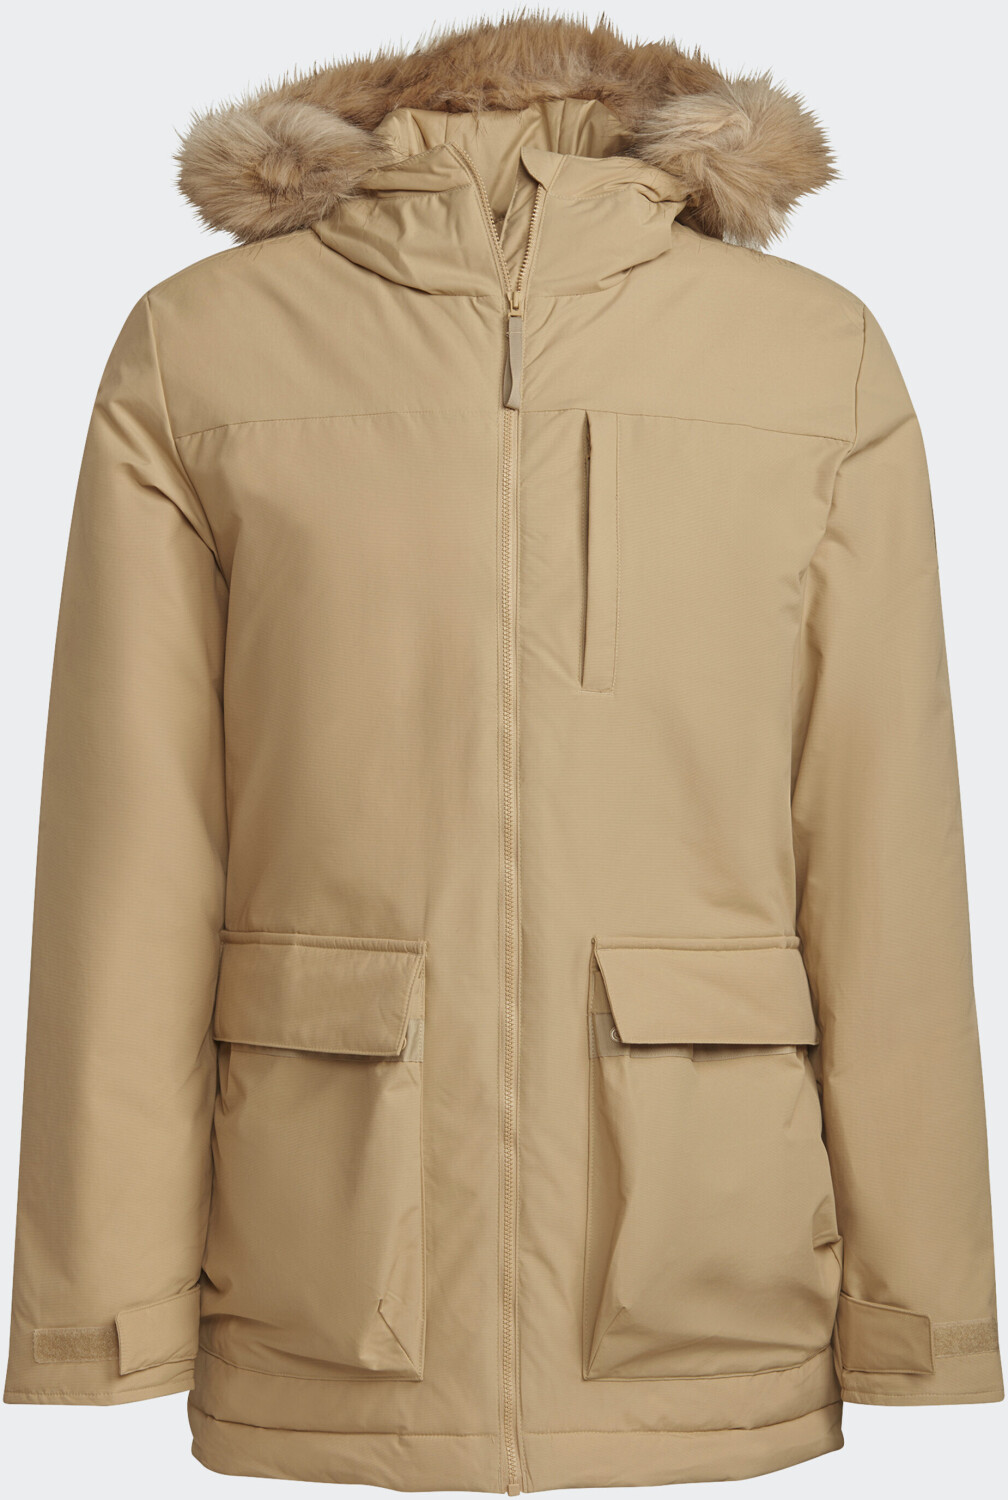 £65.00 Best on from Hooded Parka Adidas – (Today) Buy Utilitas Deals